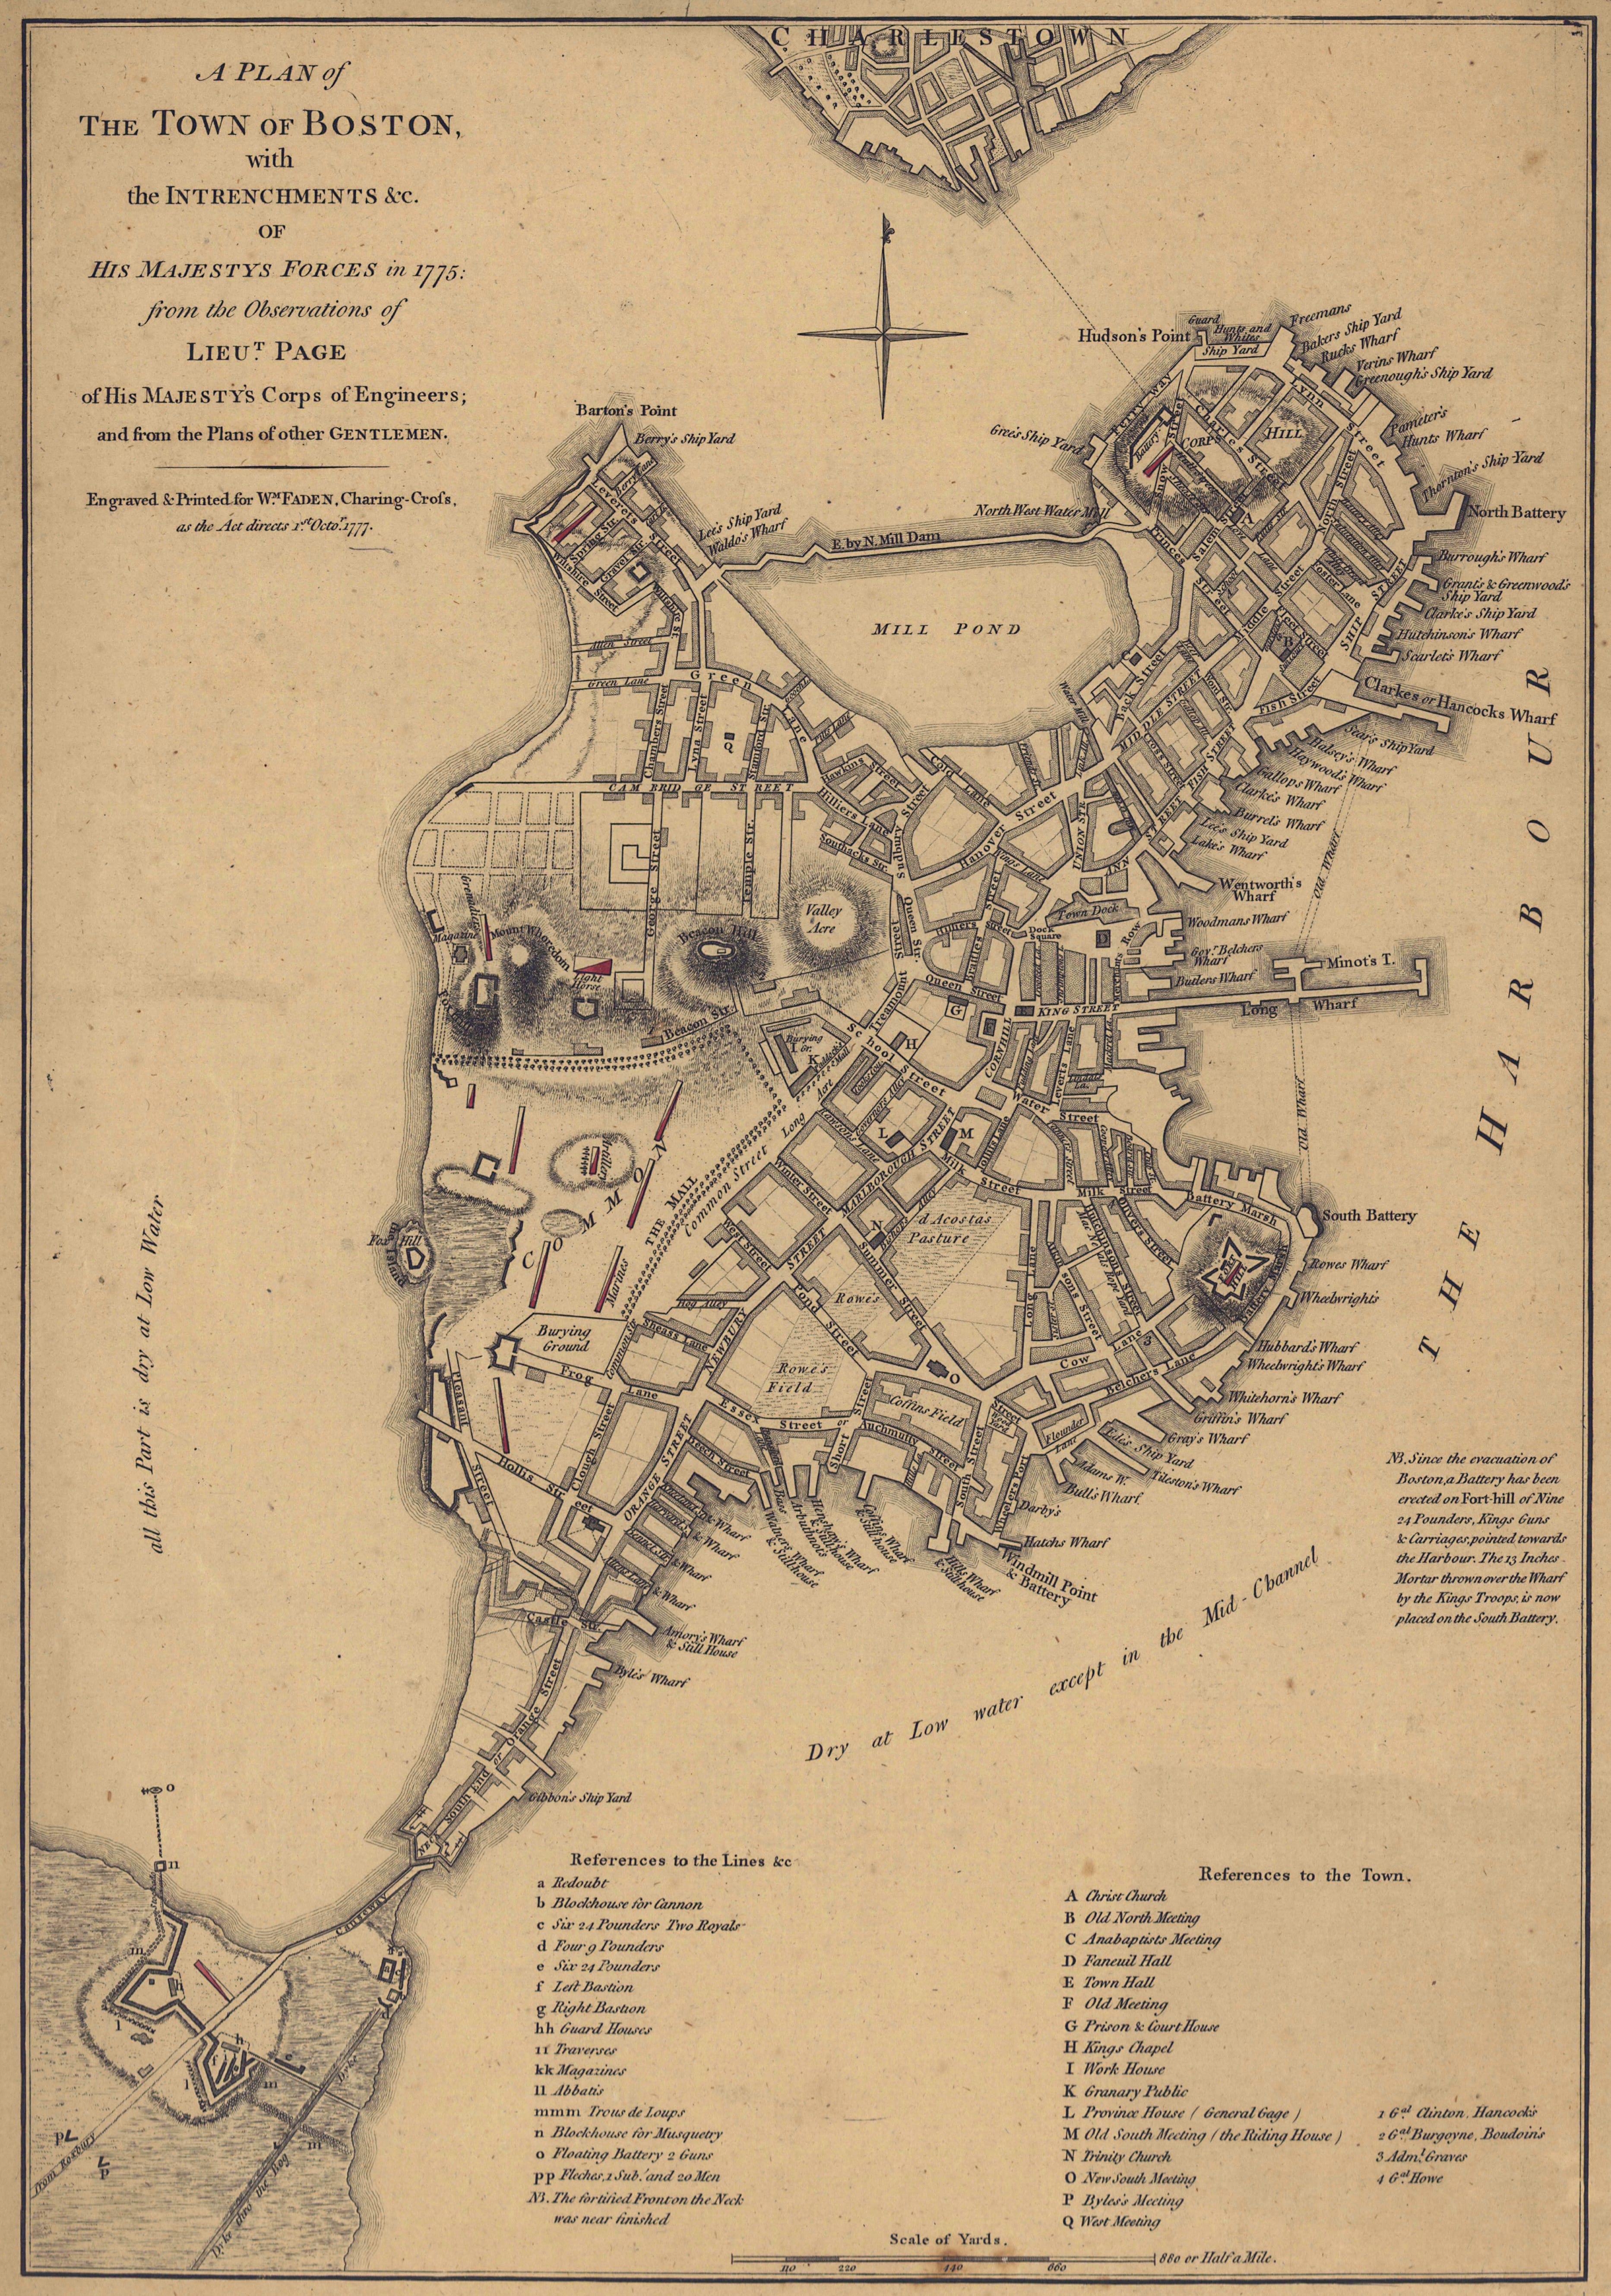 Image of Detail from “A Plan of the Town of Boston With the Intrenchments &c. of His Majesty’s Forces in 1775”